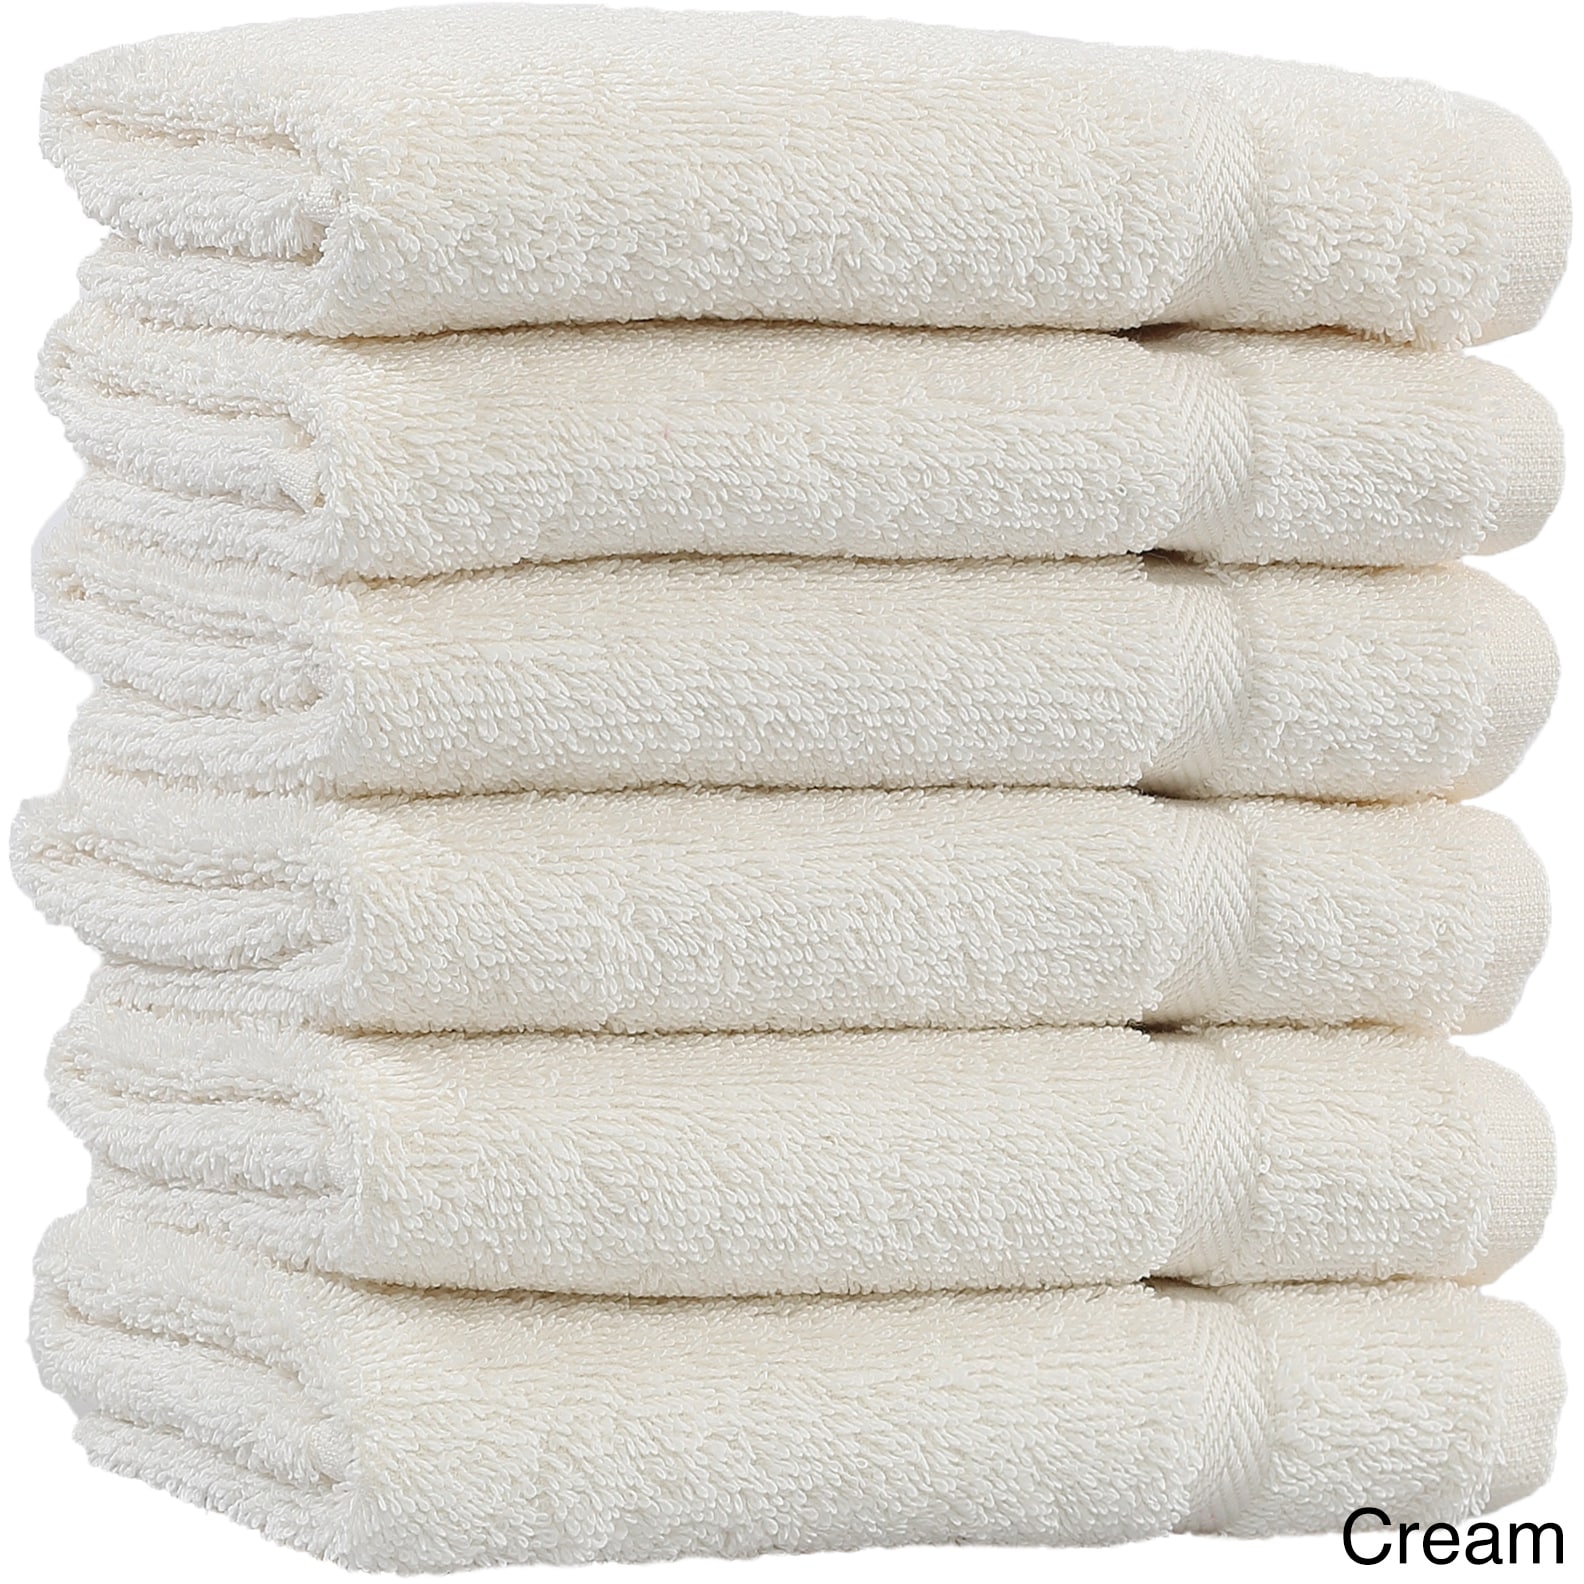 https://ak1.ostkcdn.com/images/products/11090783/Authentic-Hotel-and-Spa-Omni-Turkish-Cotton-Terry-Washcloths-Set-of-6-b435698e-f6db-4227-9703-36b5d47d6787.jpg